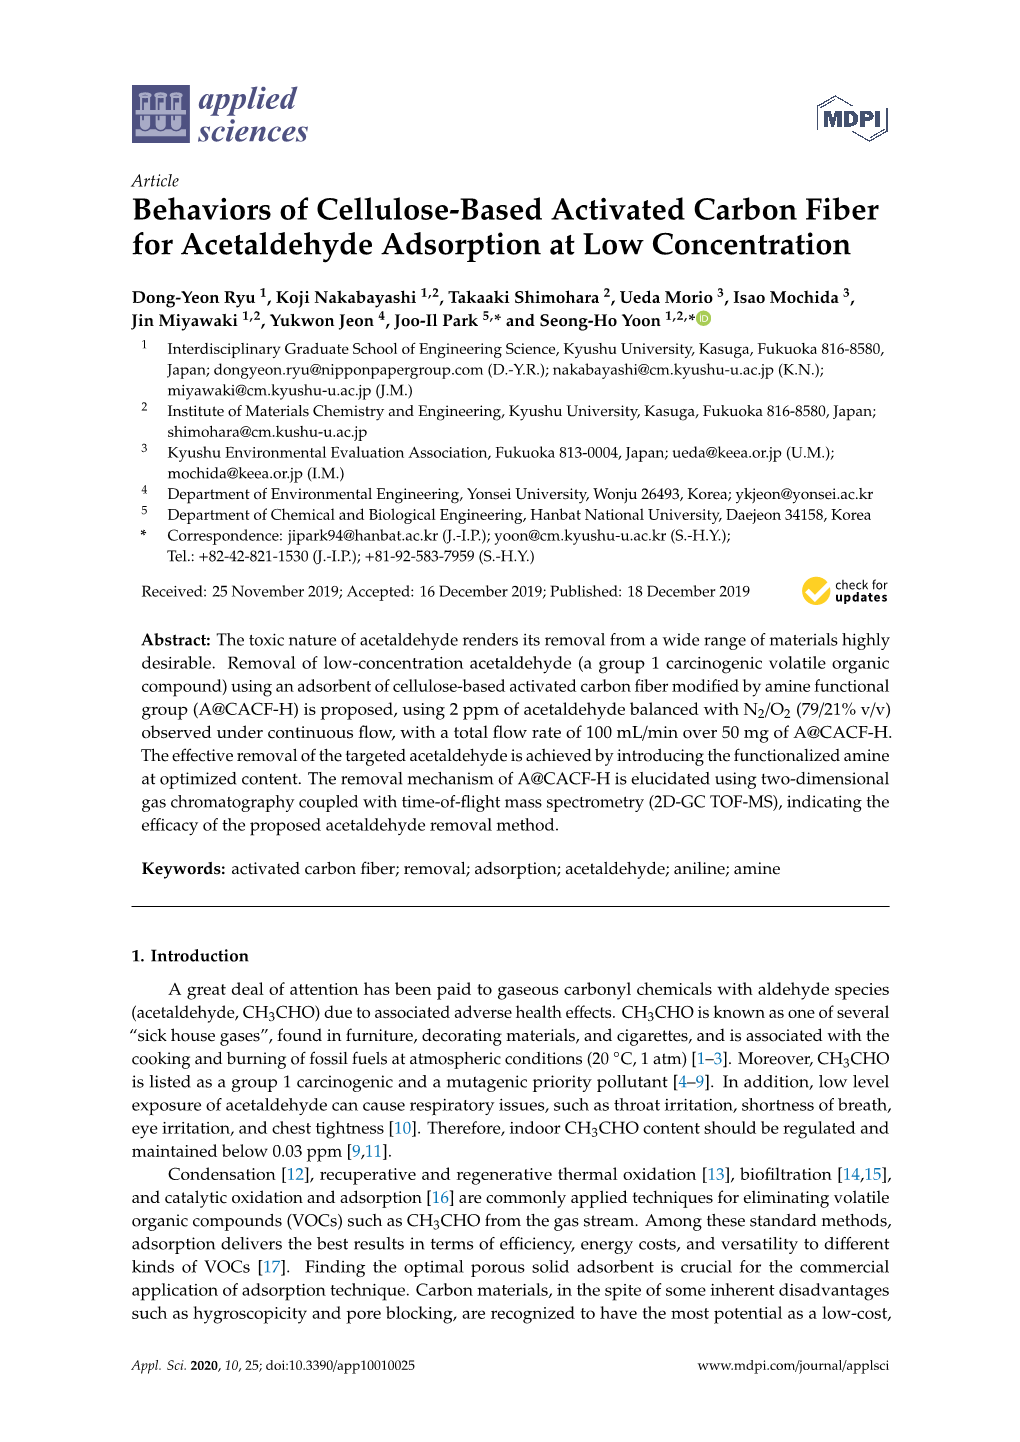 Behaviors of Cellulose-Based Activated Carbon Fiber for Acetaldehyde Adsorption at Low Concentration